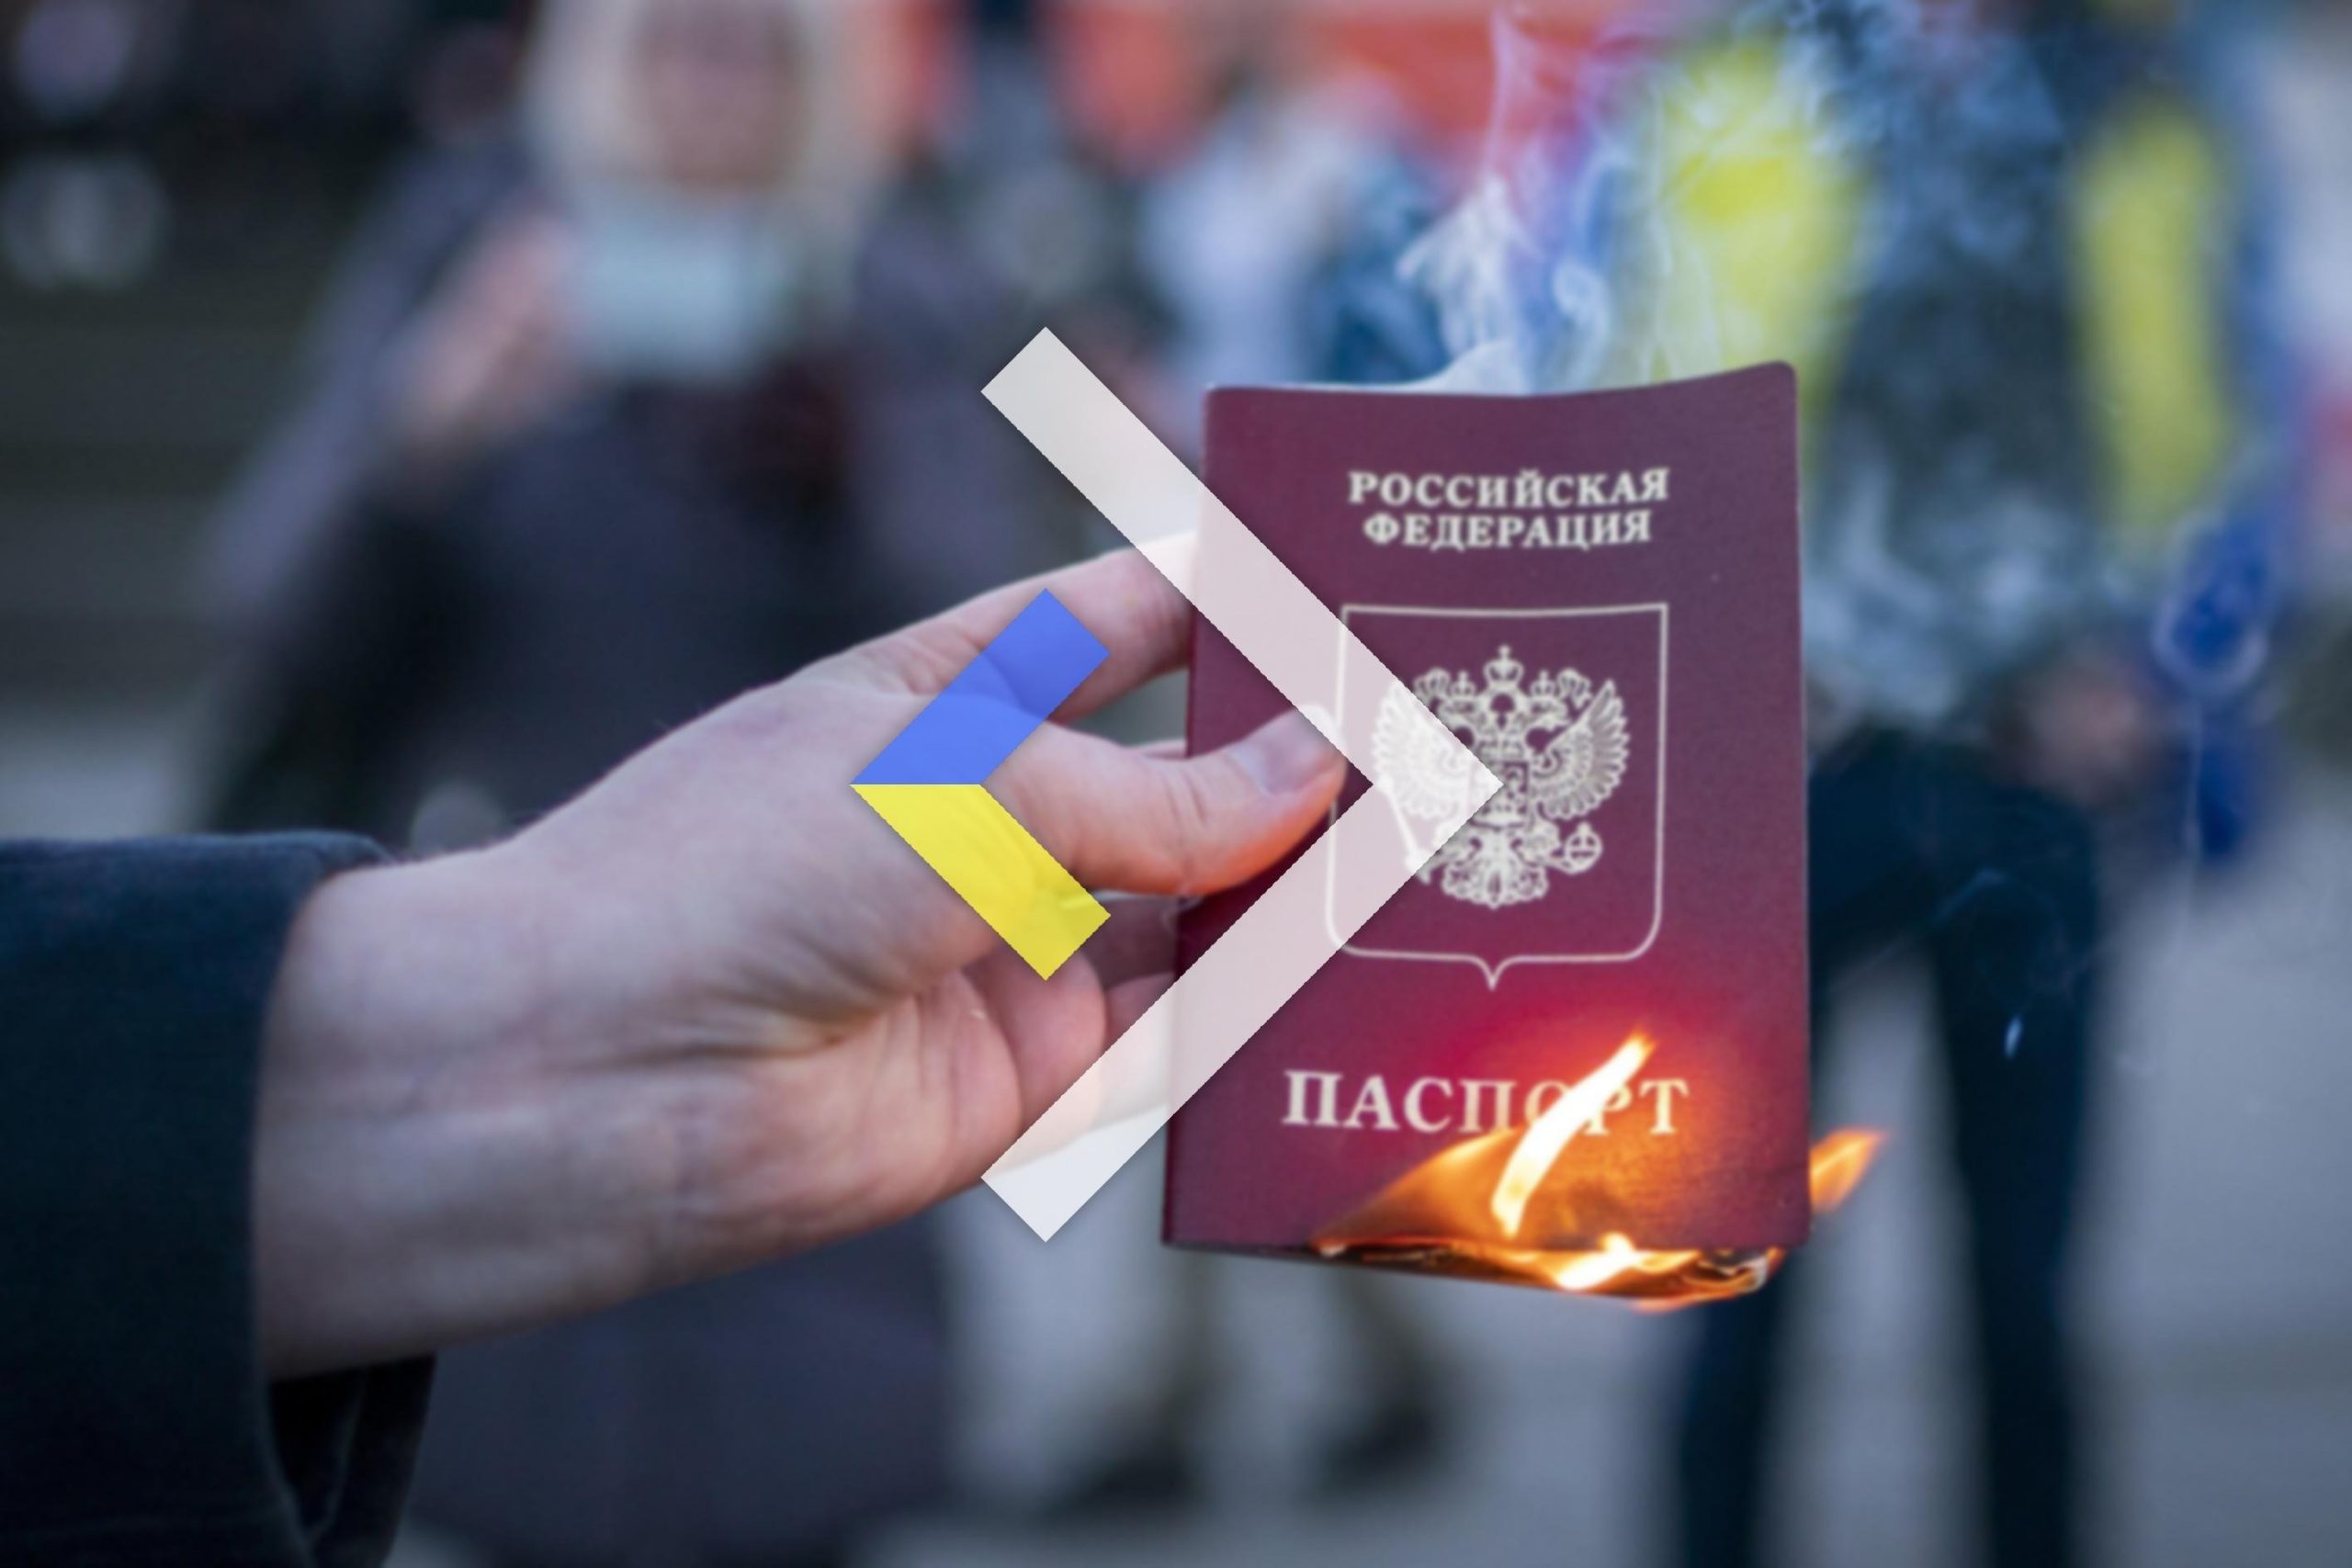 In Luhansk region, teachers are forced to take Russian passports